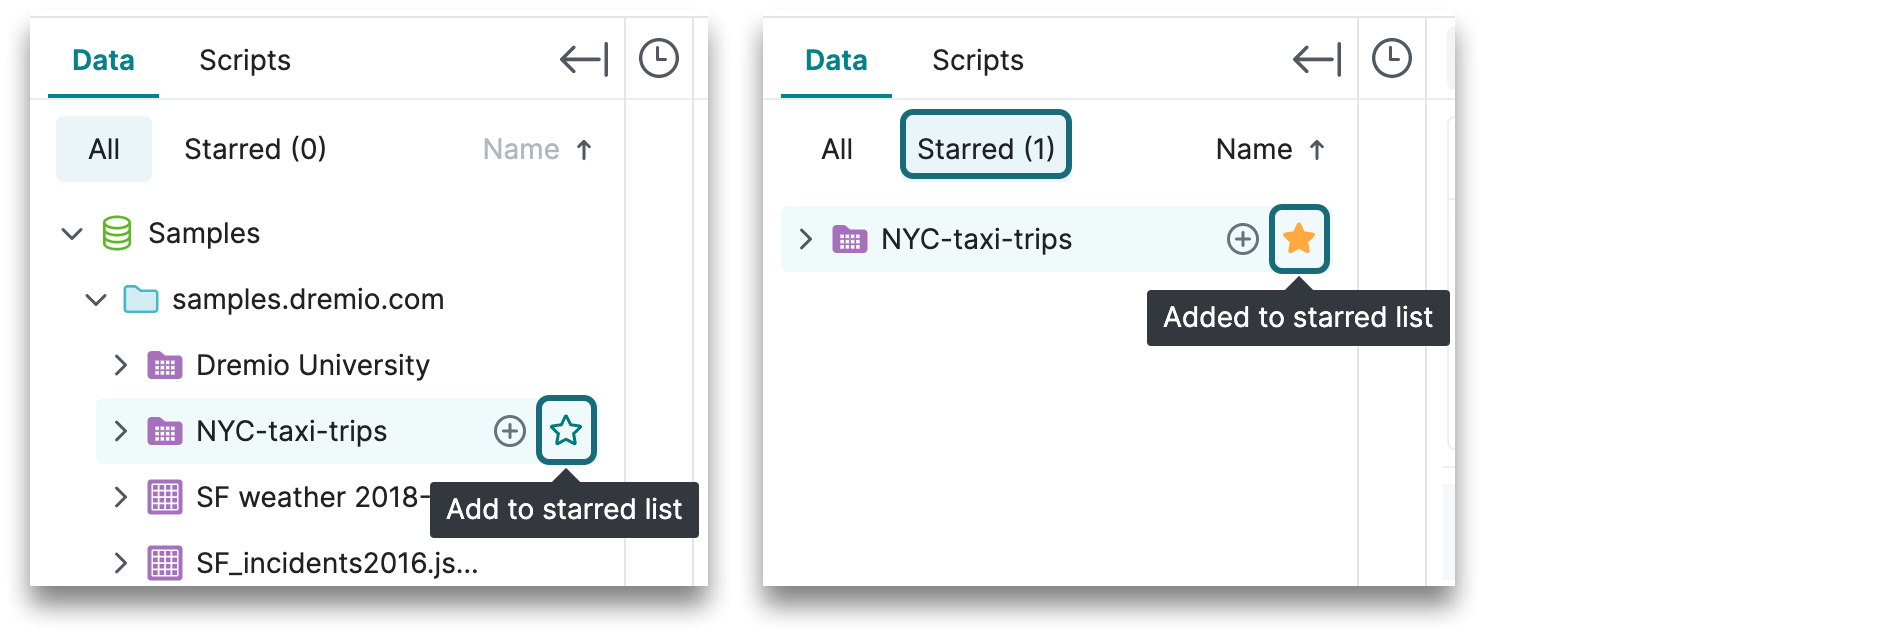 This is a screenshot showing how to star a table or view for the Starred list.